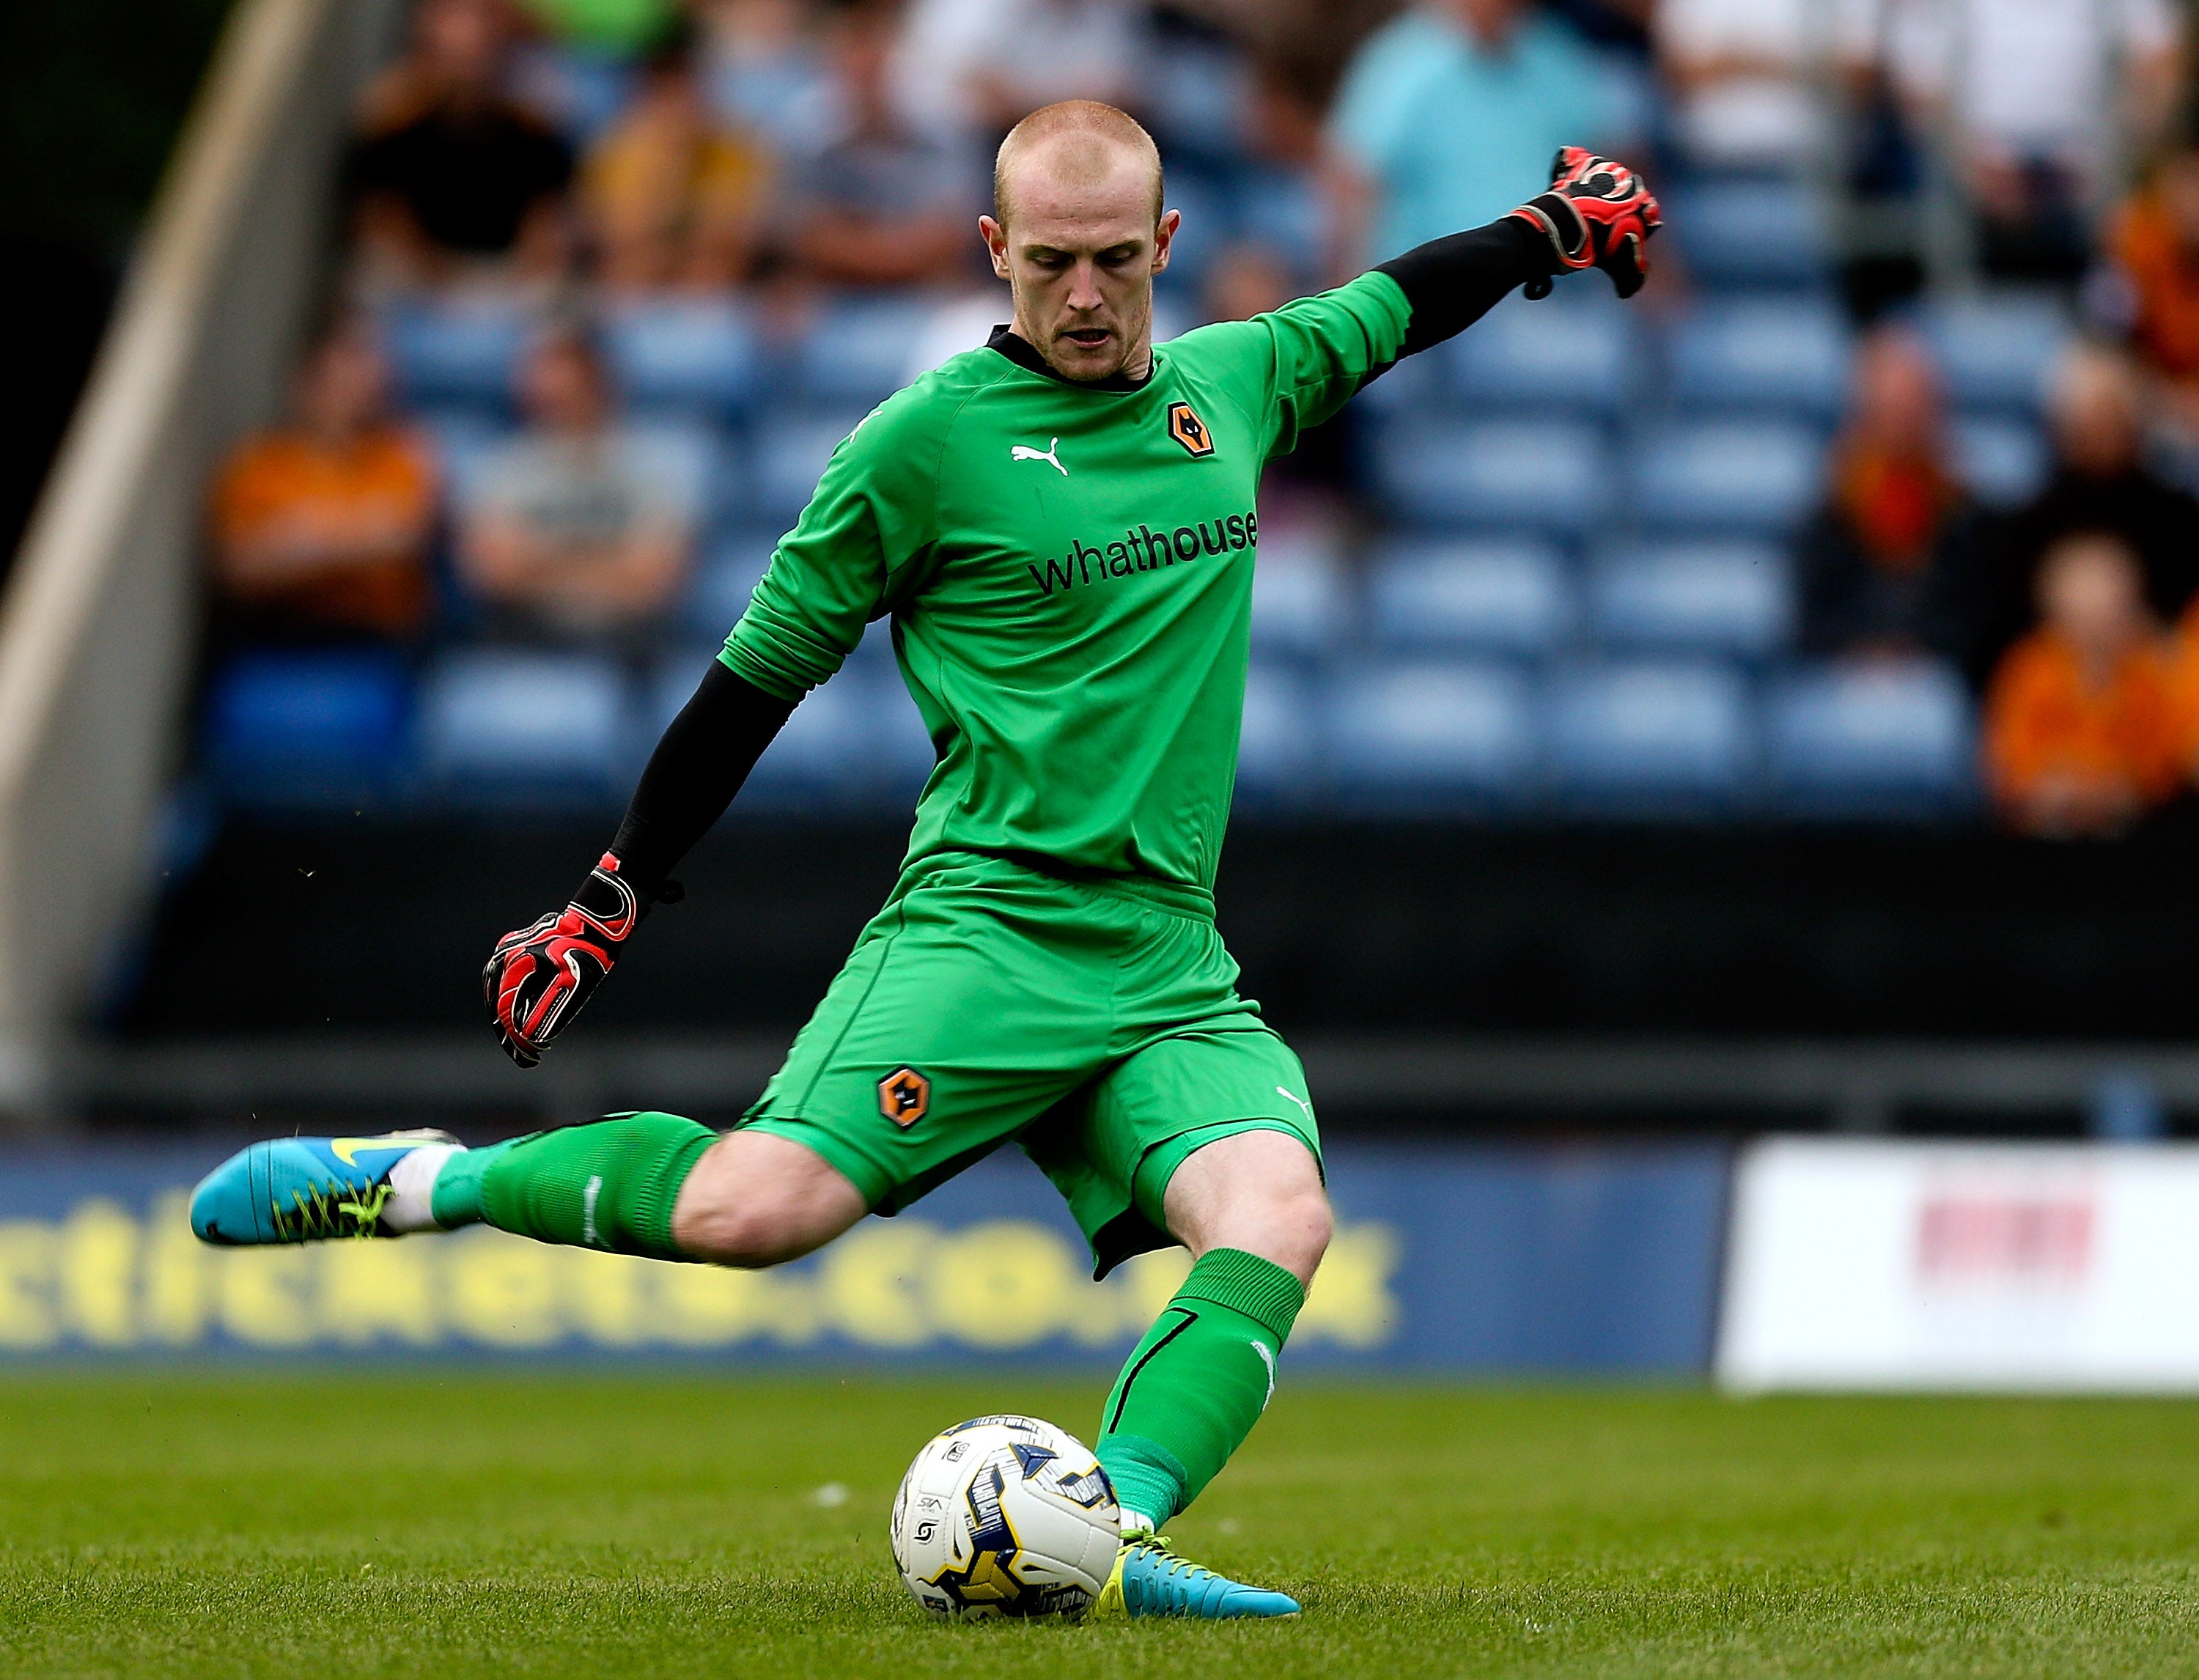 Aaron McCarey, pictured playing for Wolves, was the goalkeeper involved